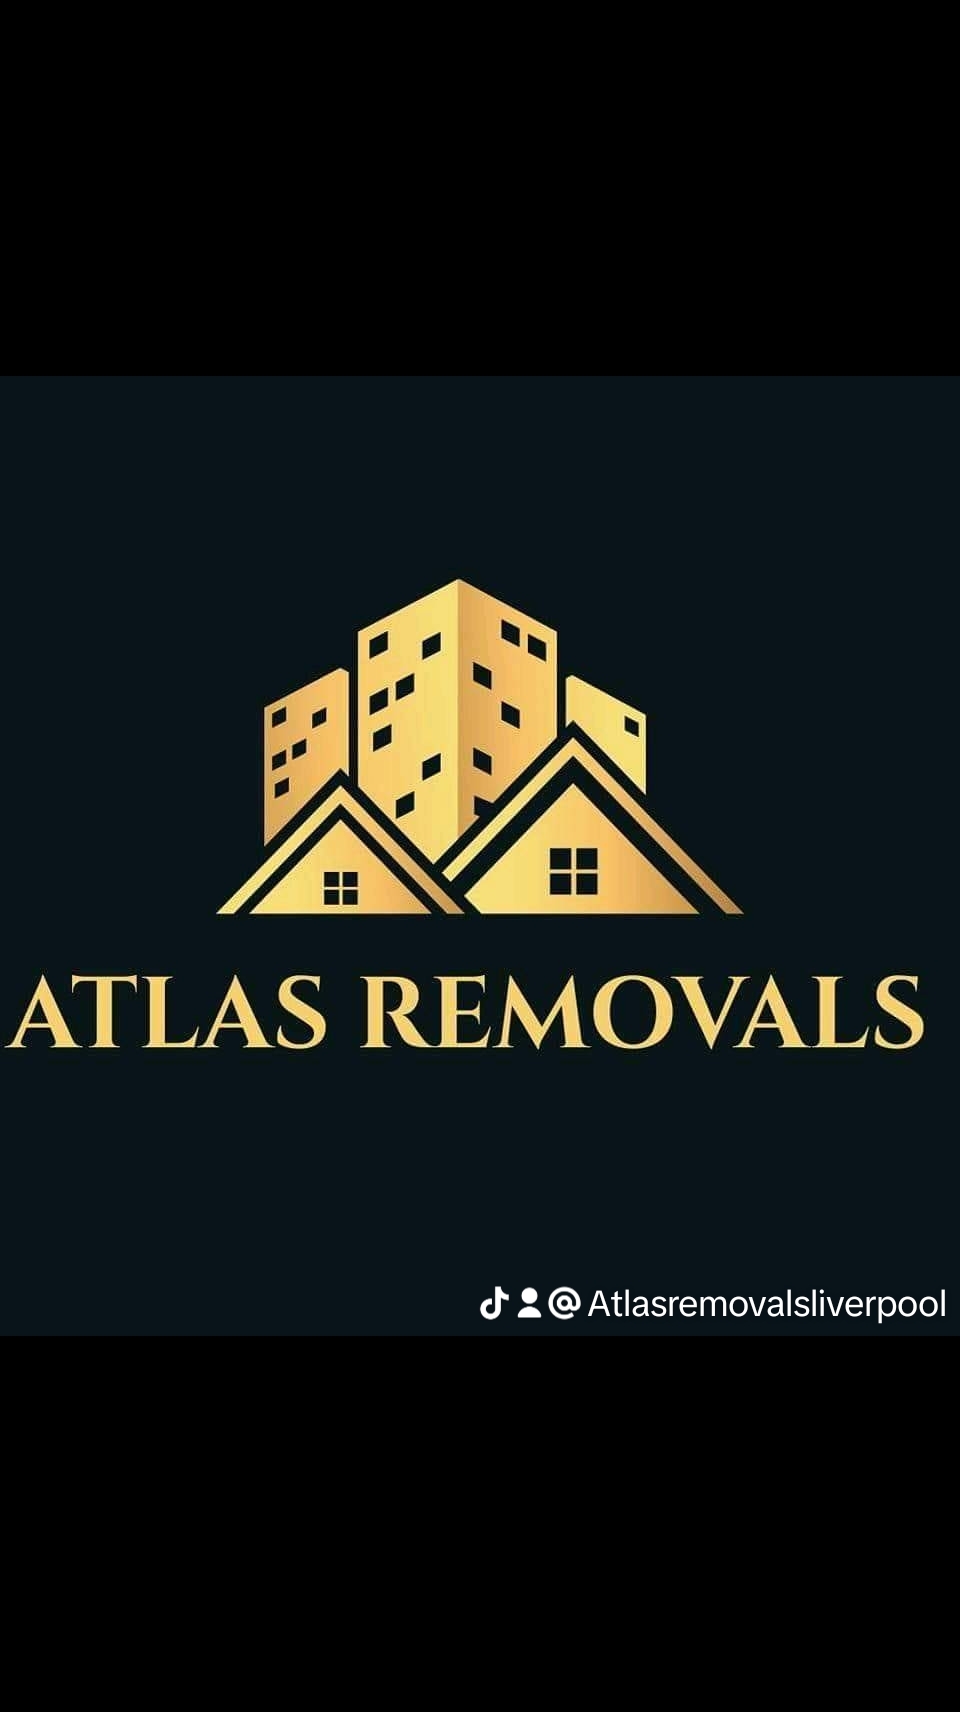 Atlas removals Liverpool & Nw logo